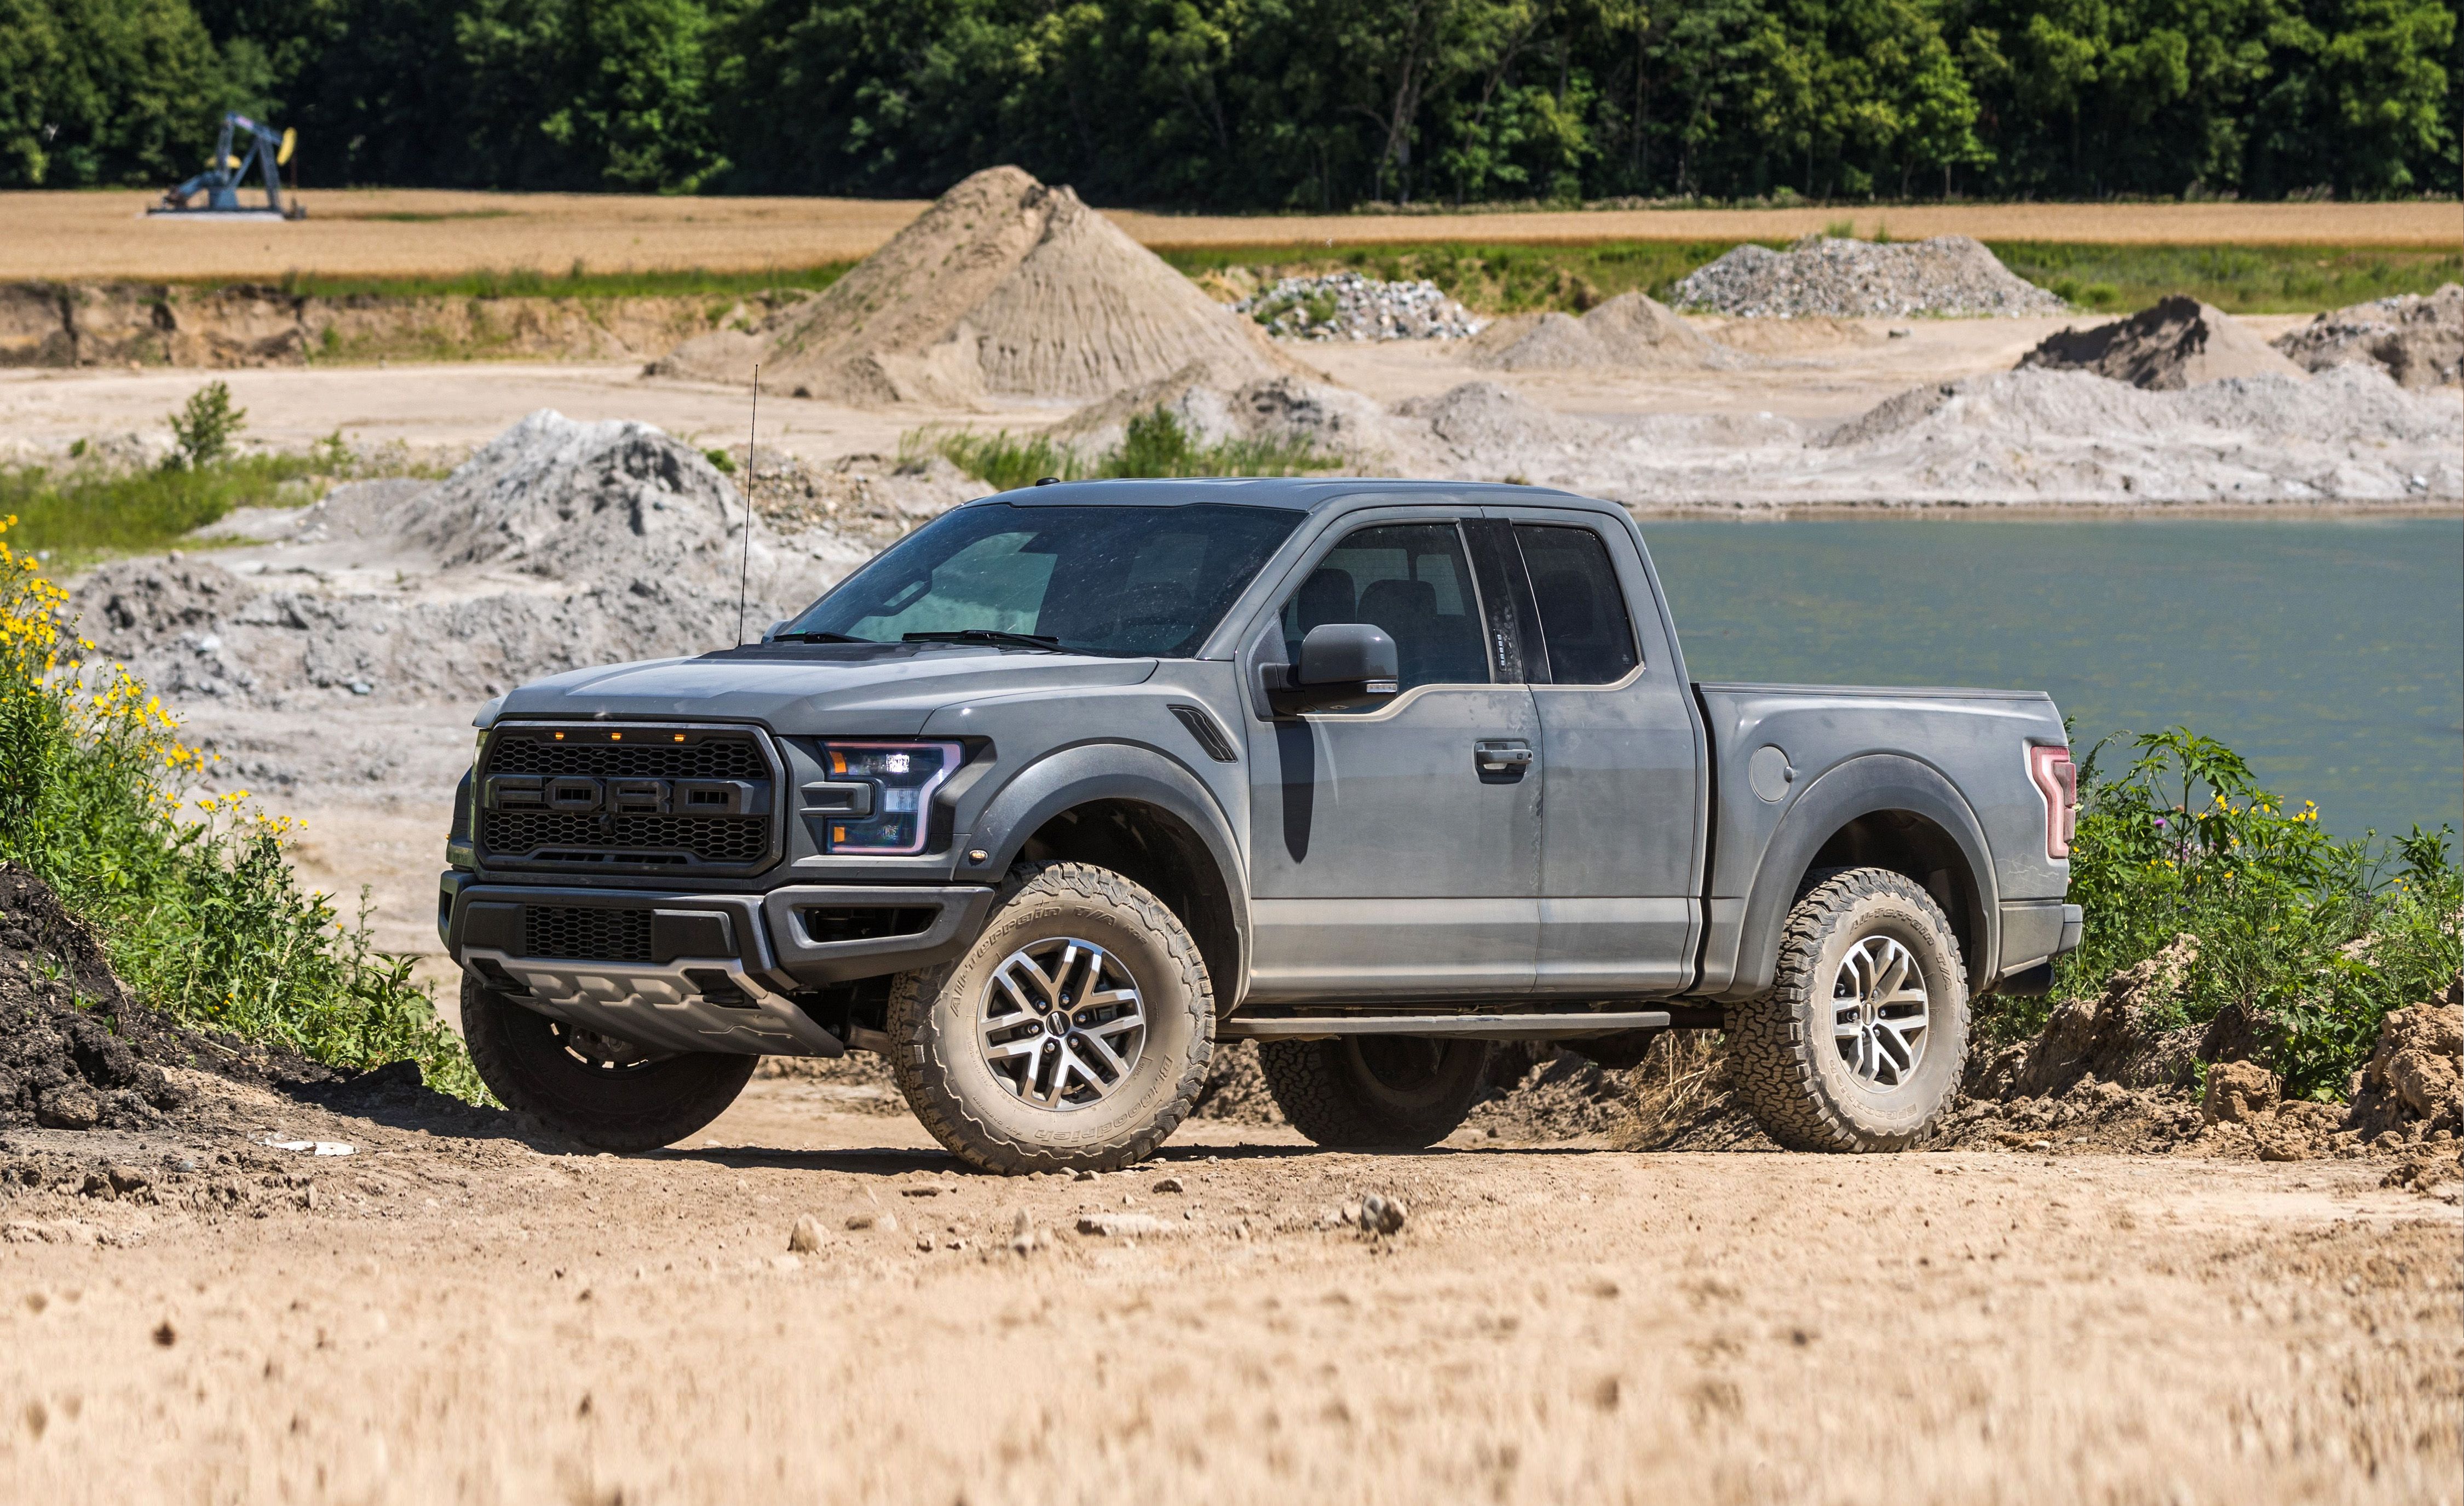 2019 Ford F-150 Raptor Reviews | Ford F-150 Raptor Price, Photos, and ...